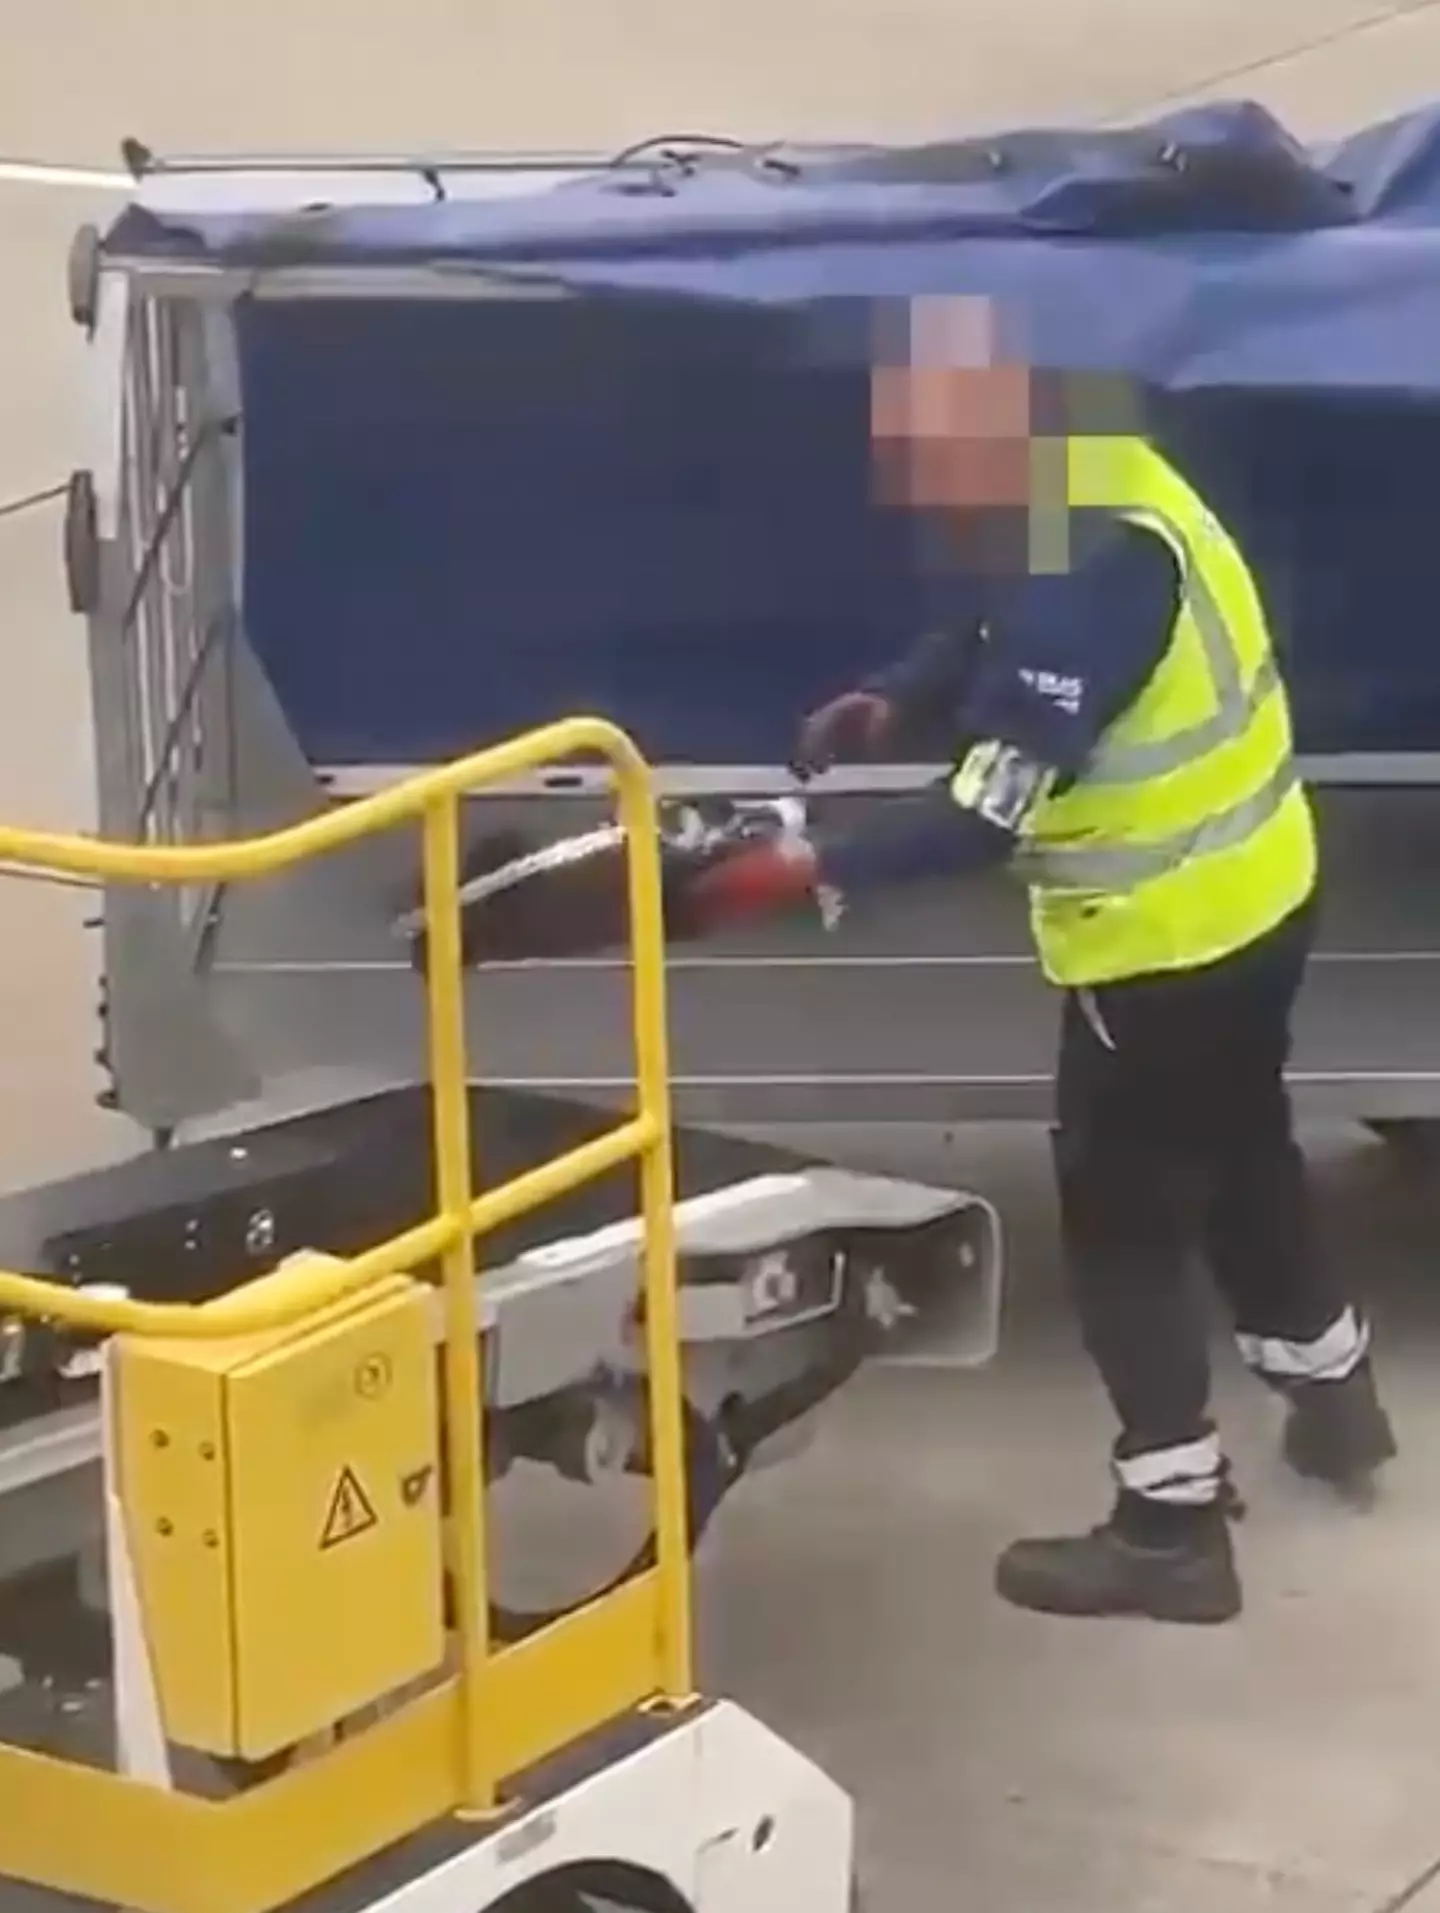 A baggage handler ws spotted throwing instruments onto the conveyor belt.